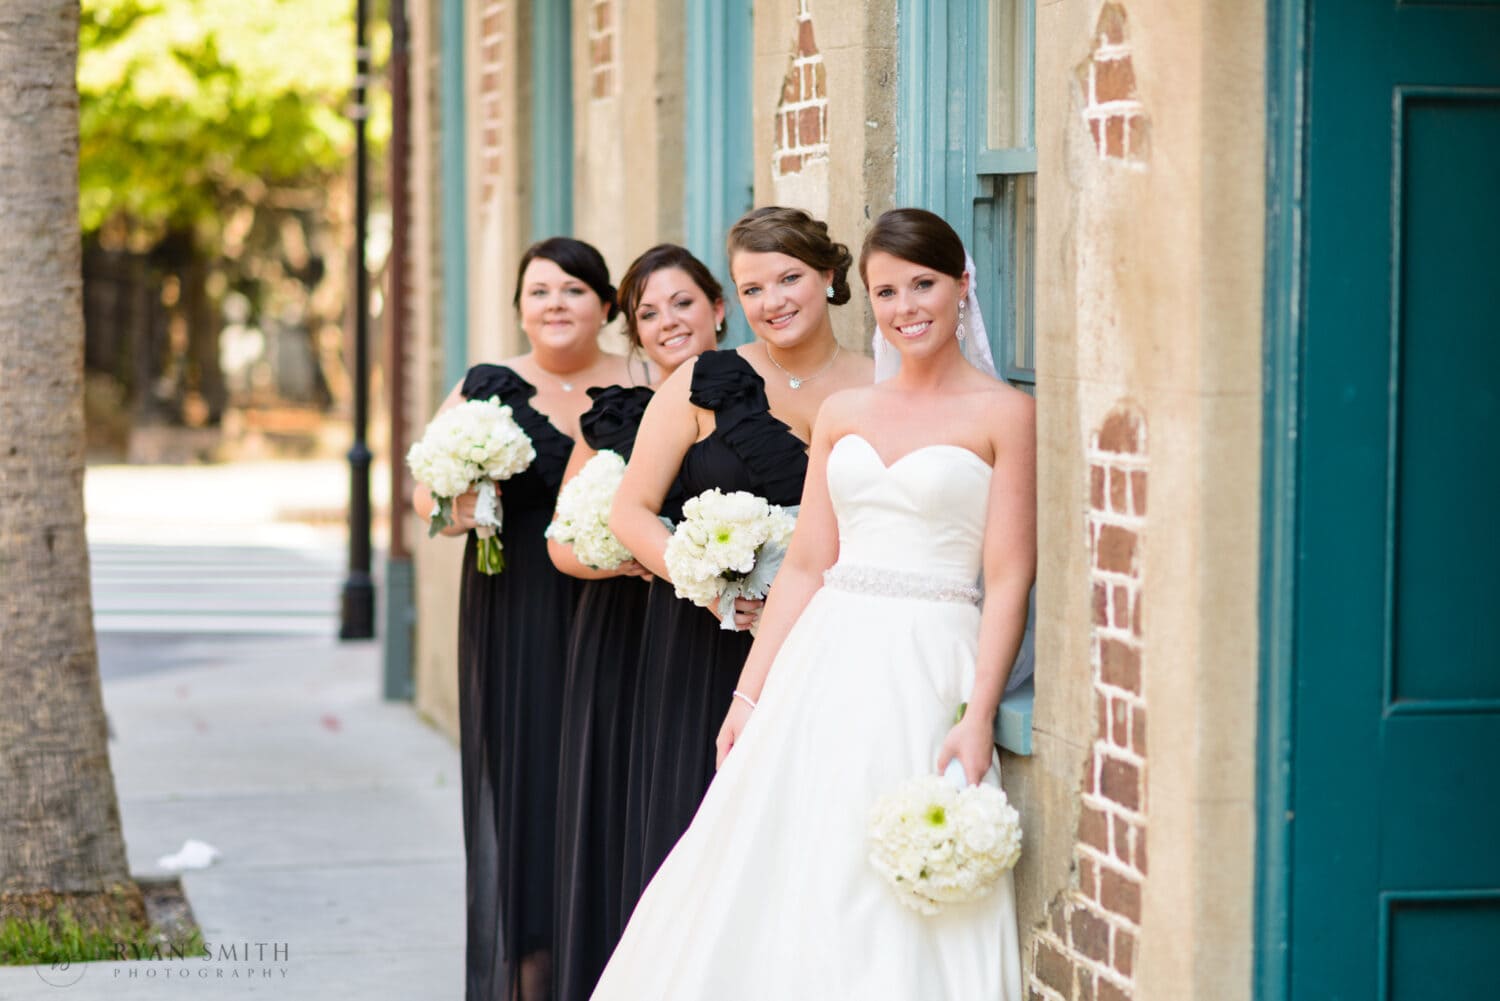 Bride and bridesmaids leaning against the window - Downtown Charleston, SC